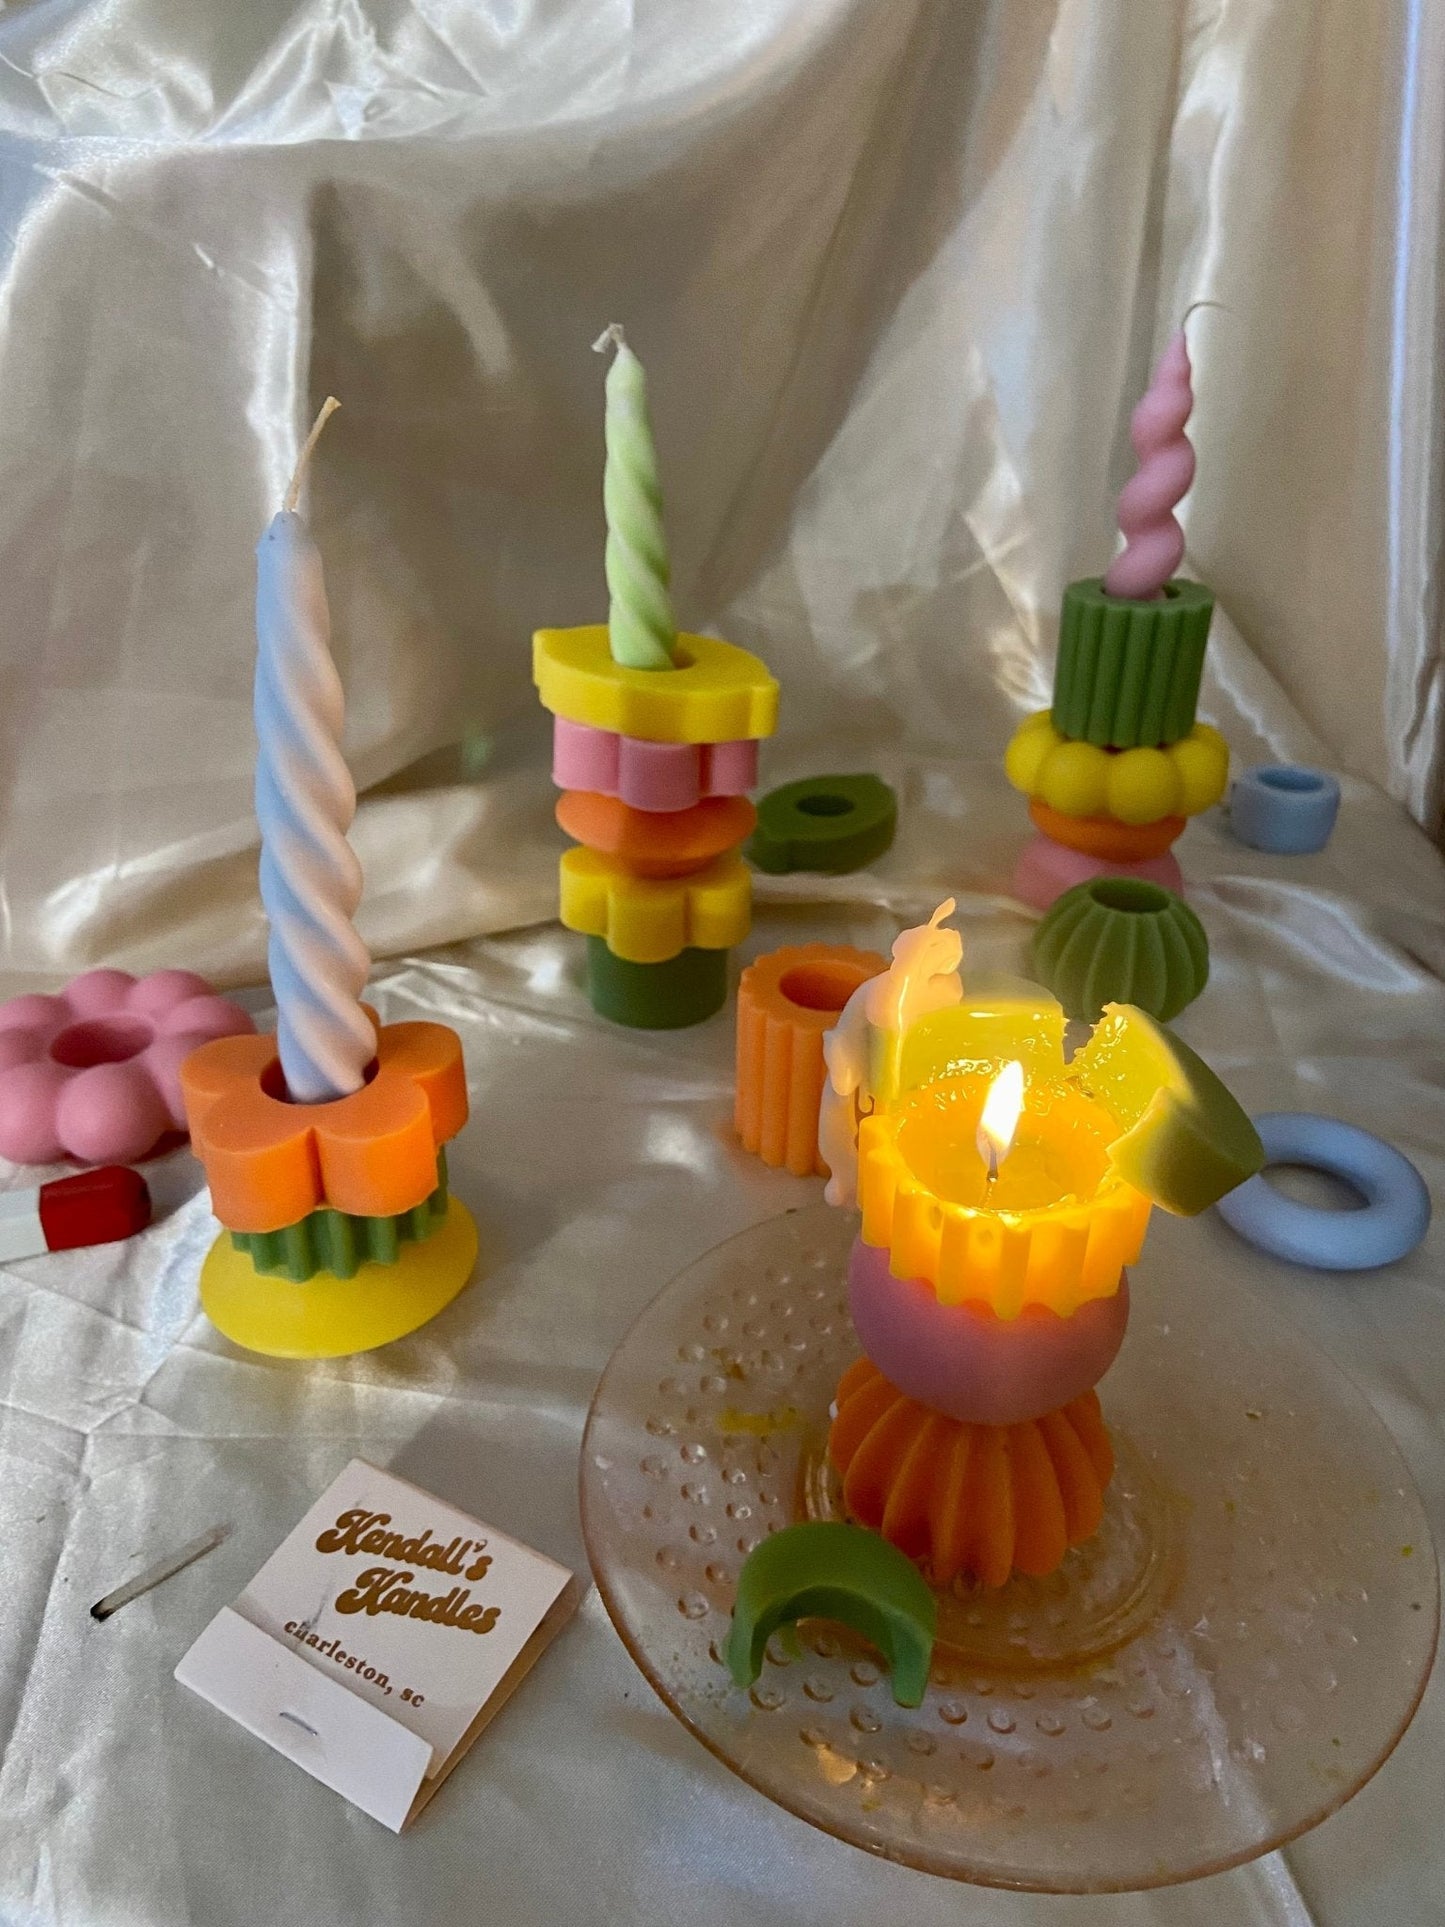 Taper candle stacker - Kendall's Kandles